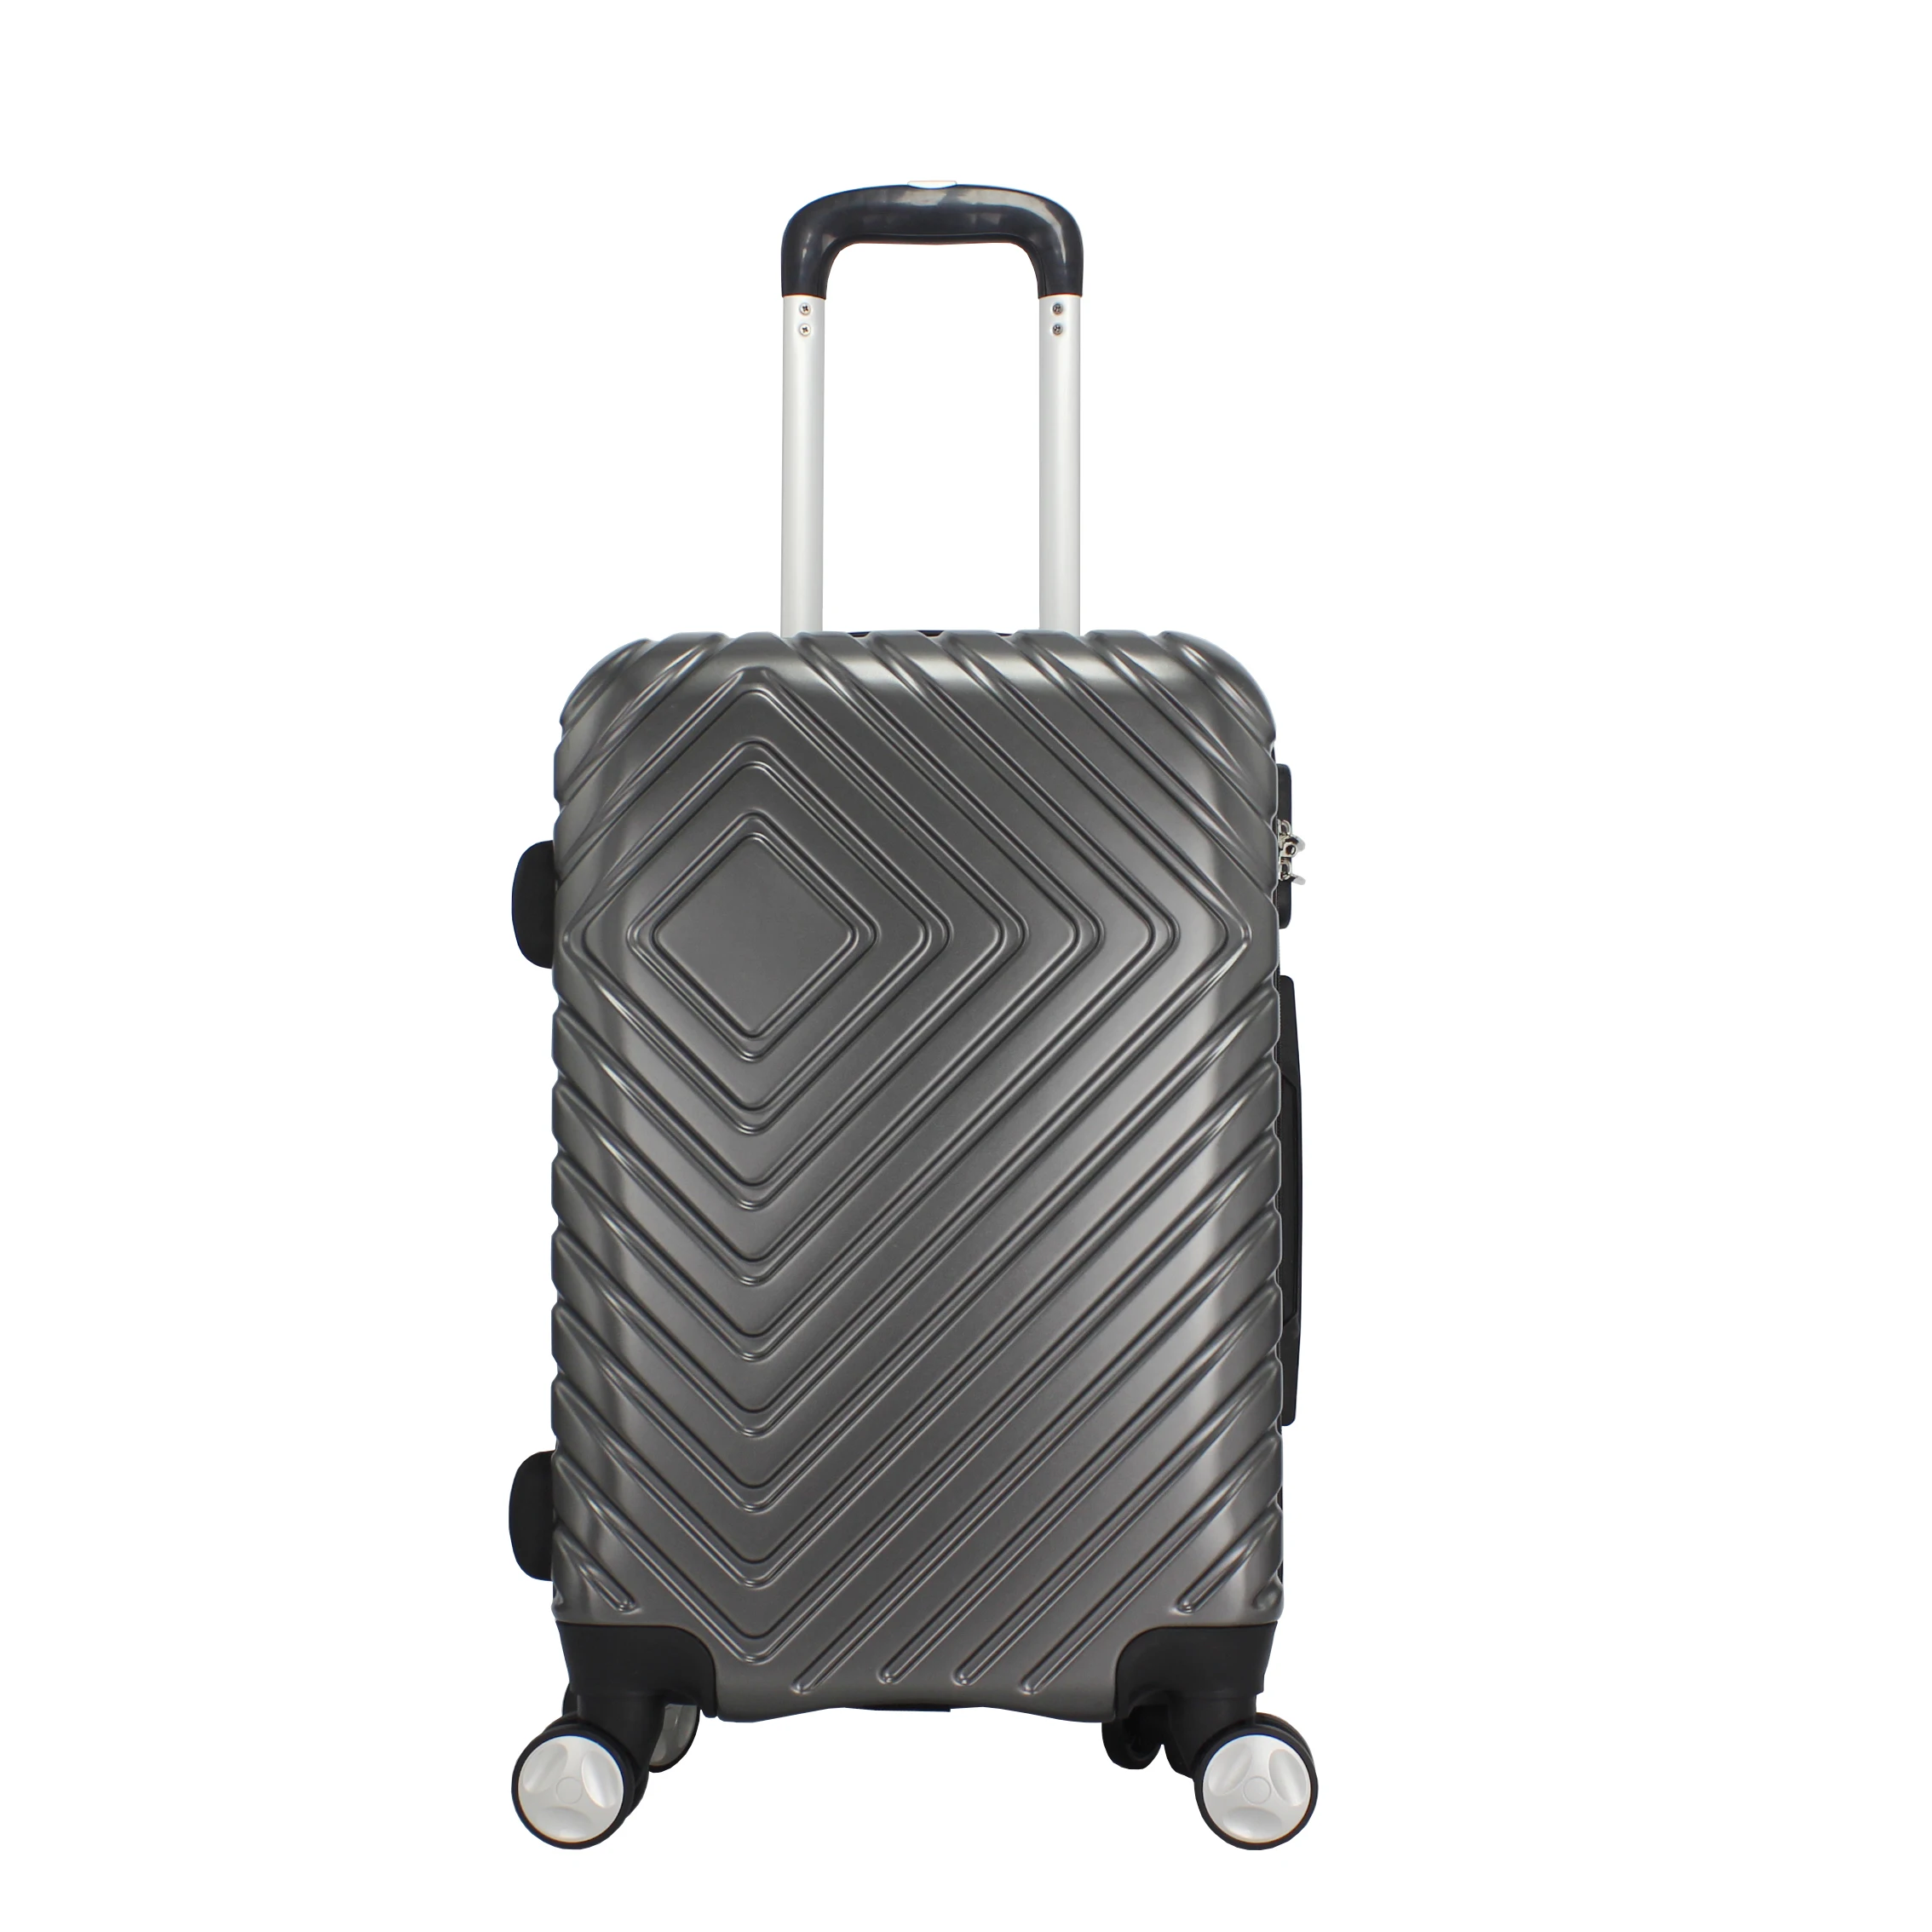 cabin trolley suitcase